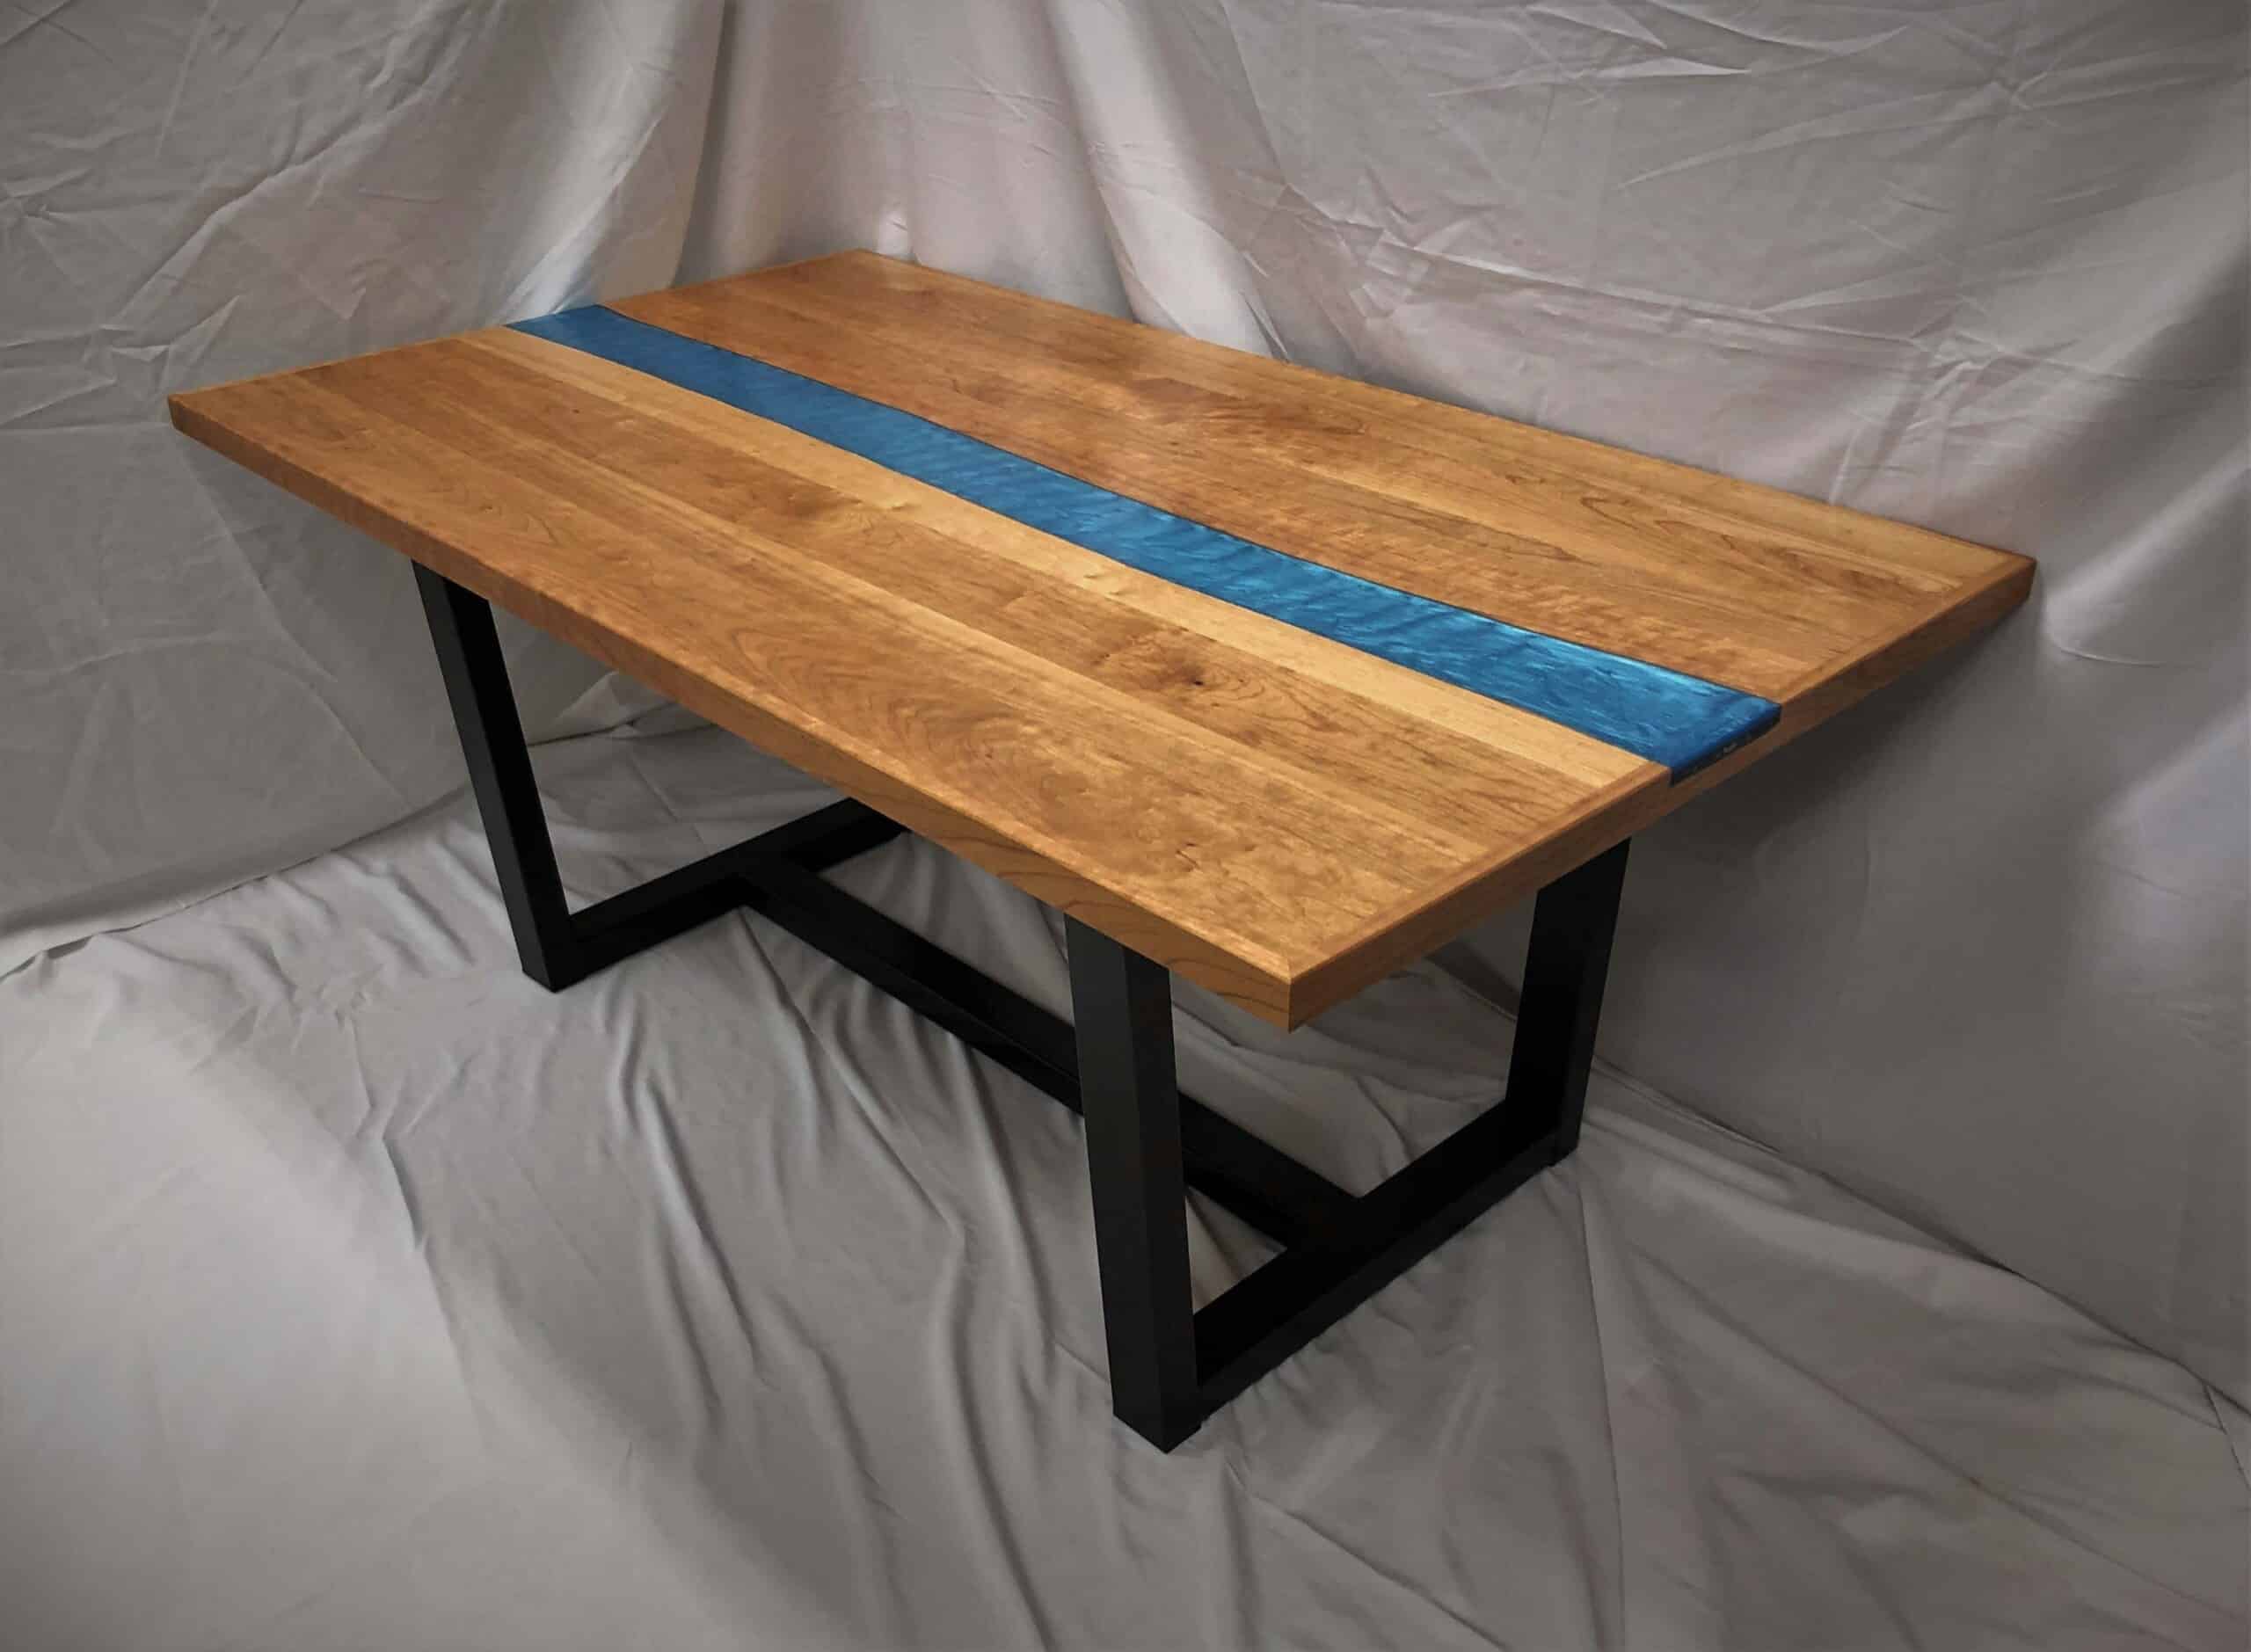 Featured image for “Canyon River Dining Table”